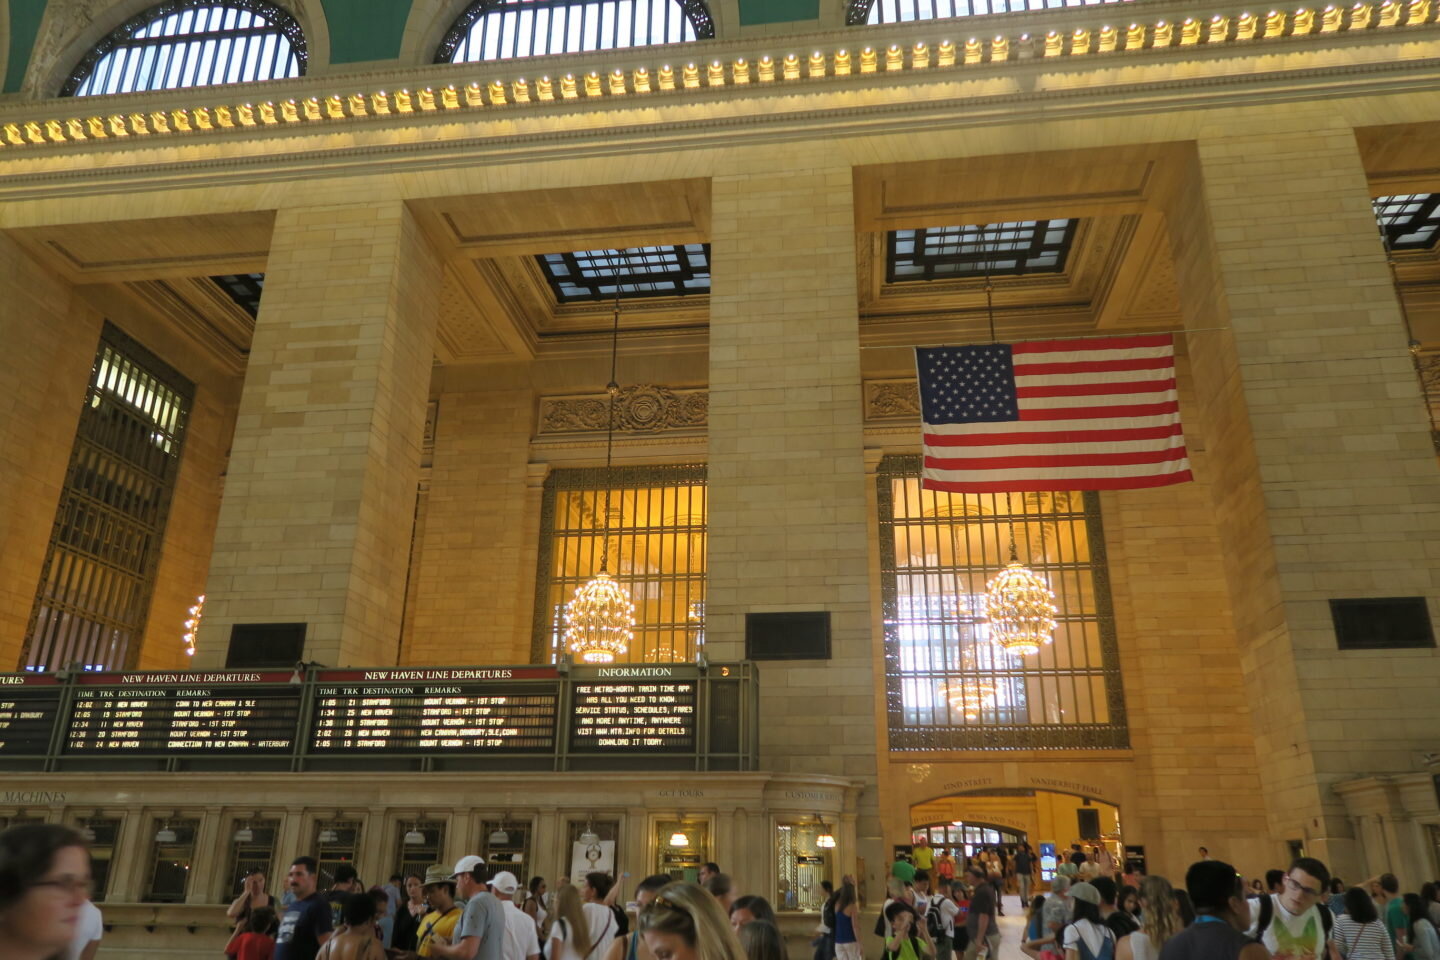 GRAND CENTRAL WHISPERING WALL